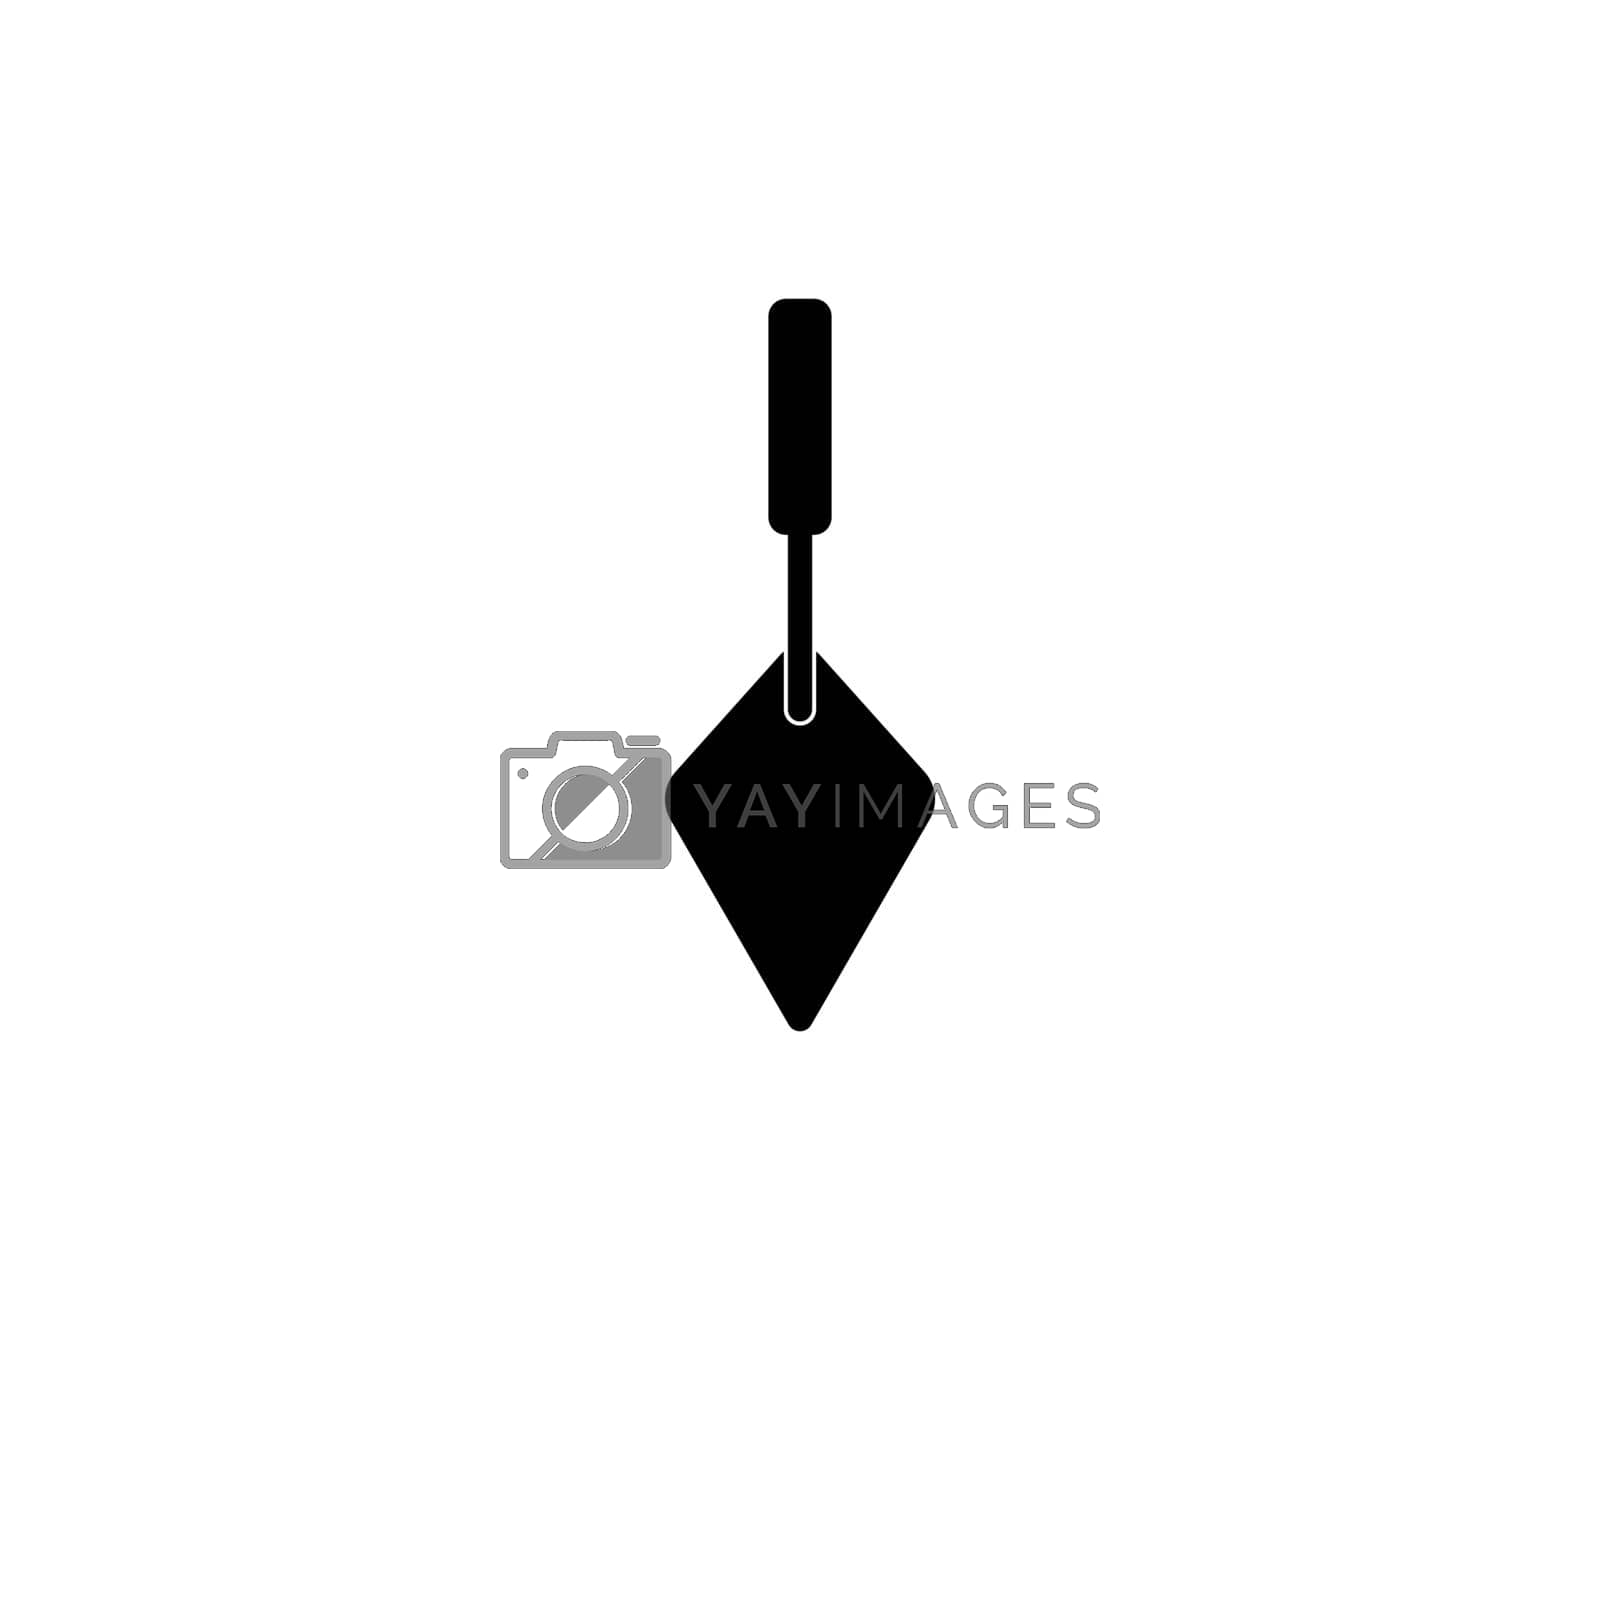 Royalty free image of Trowel icon symbol simple design by misteremil